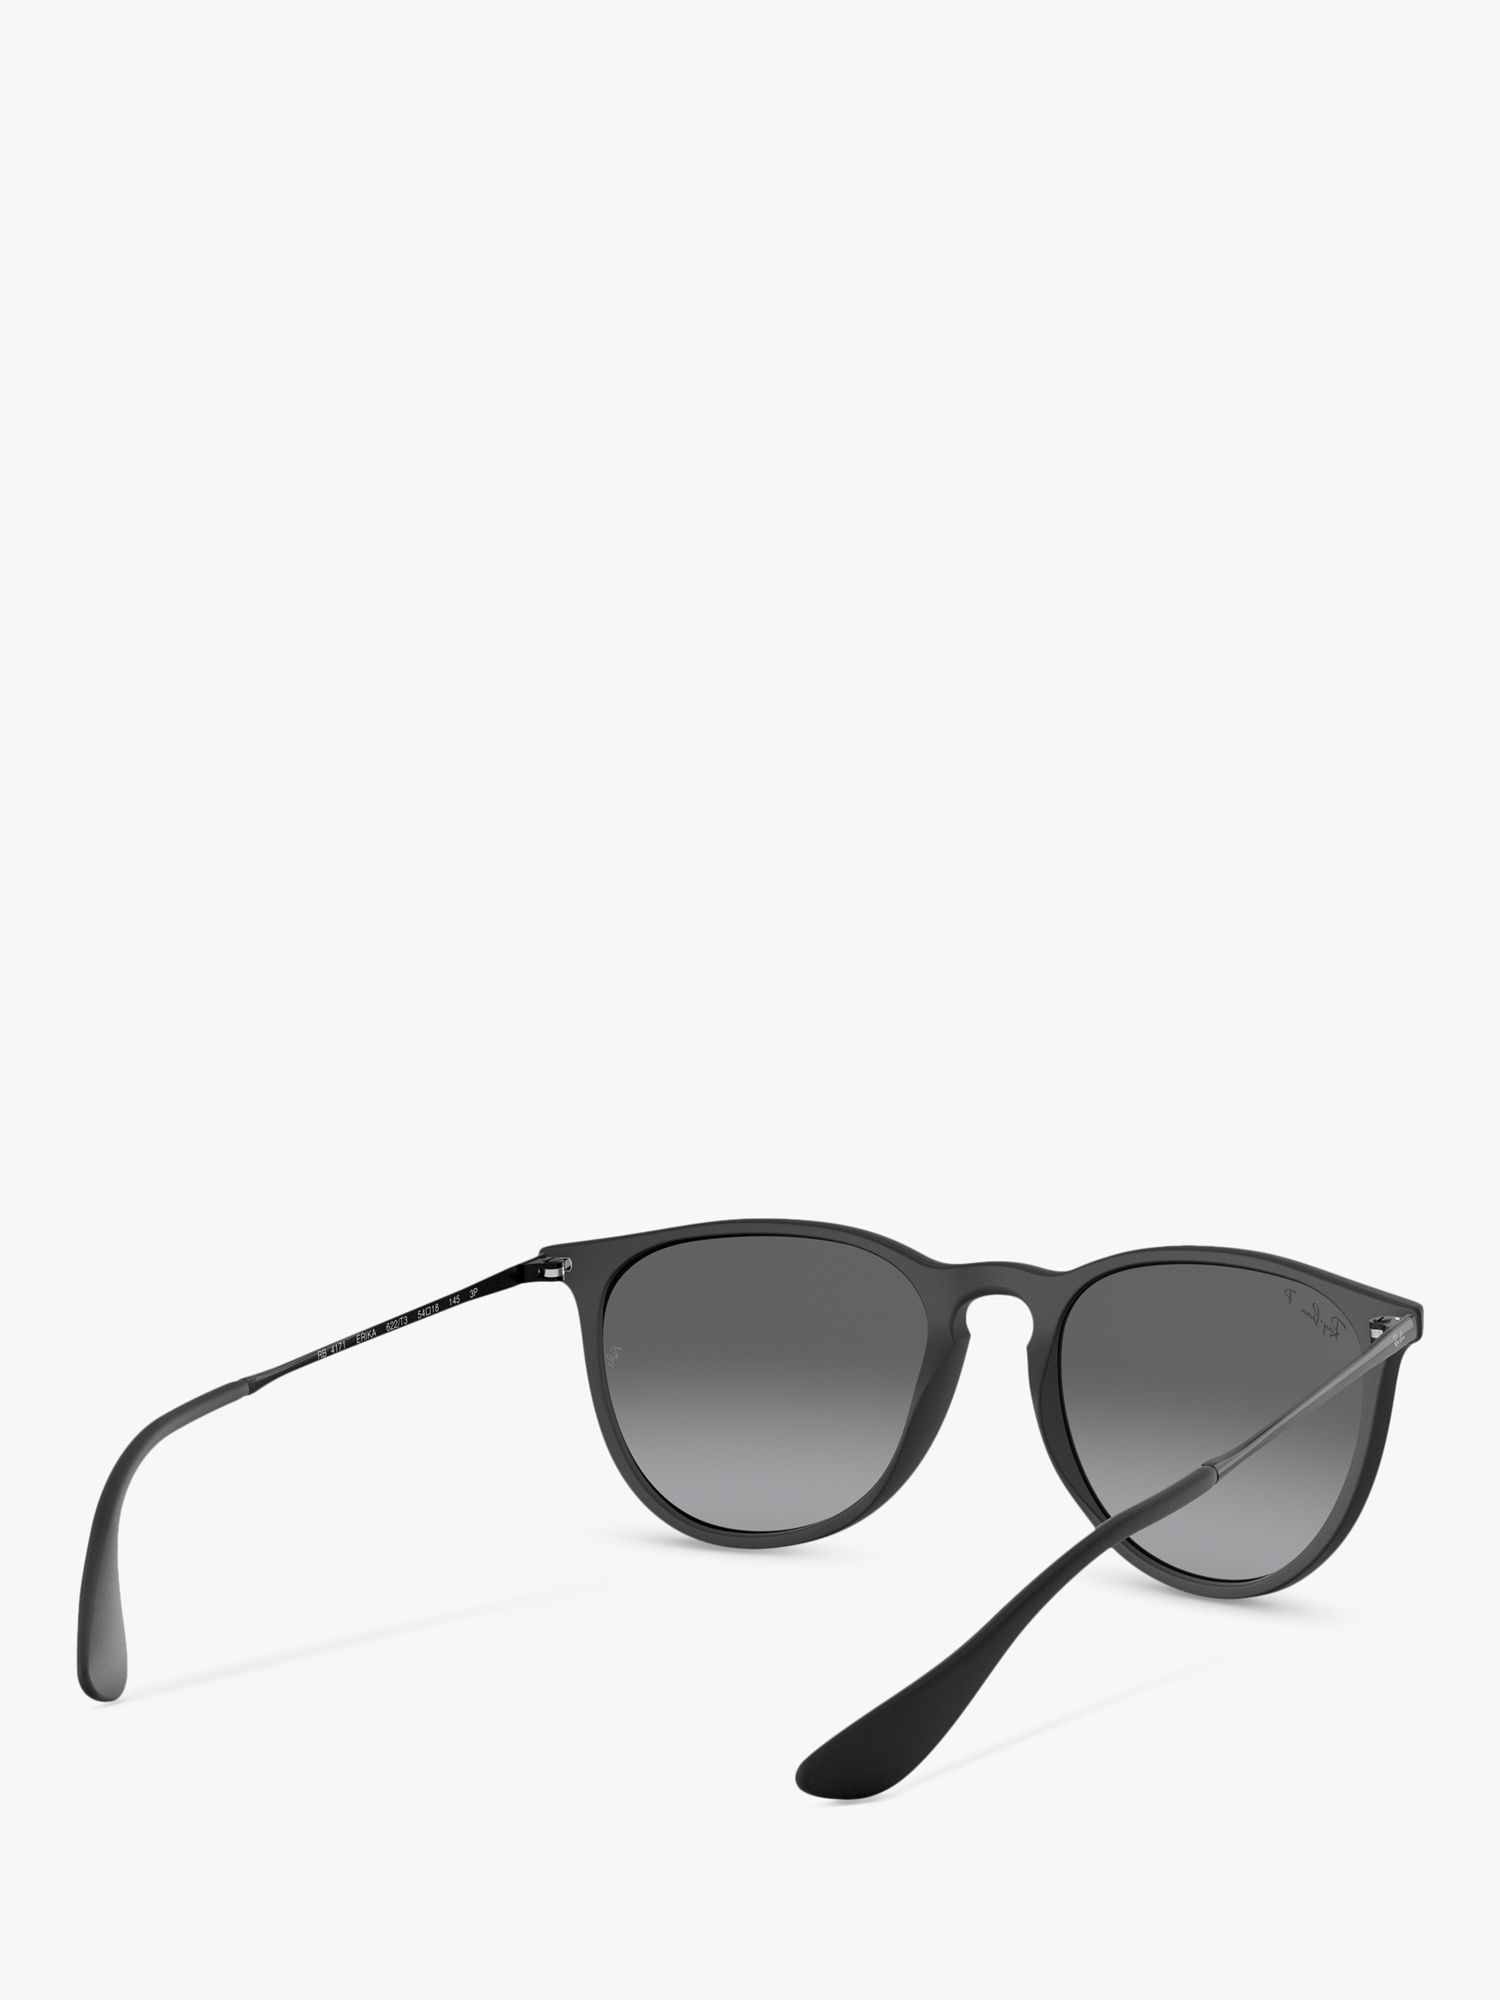 Buy Ray-Ban RB4171 Women's Erika Classic Polarised Oval Sunglasses, Black Online at johnlewis.com